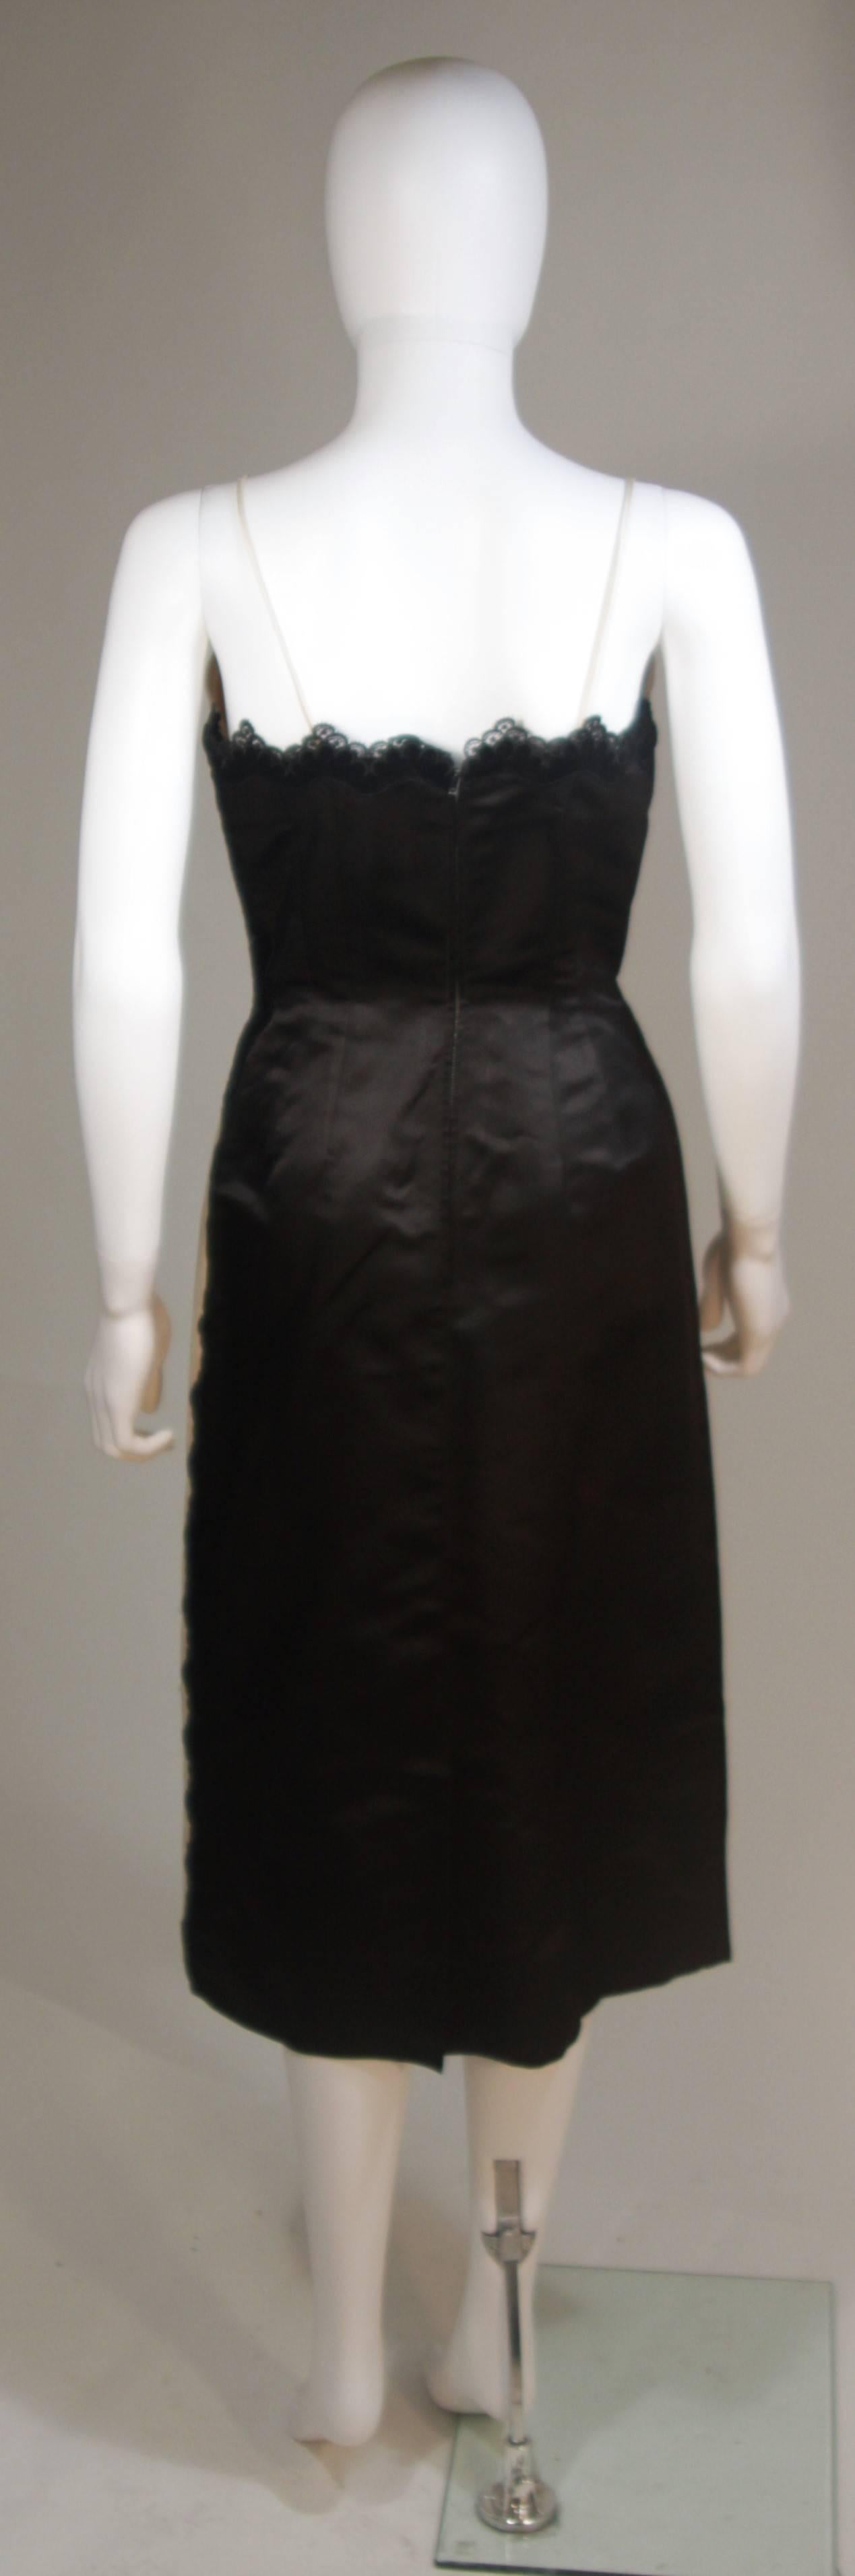 OLEG CASSINI Black and White Contrast Cocktail Dress with Lace Size 2-4 For Sale 4